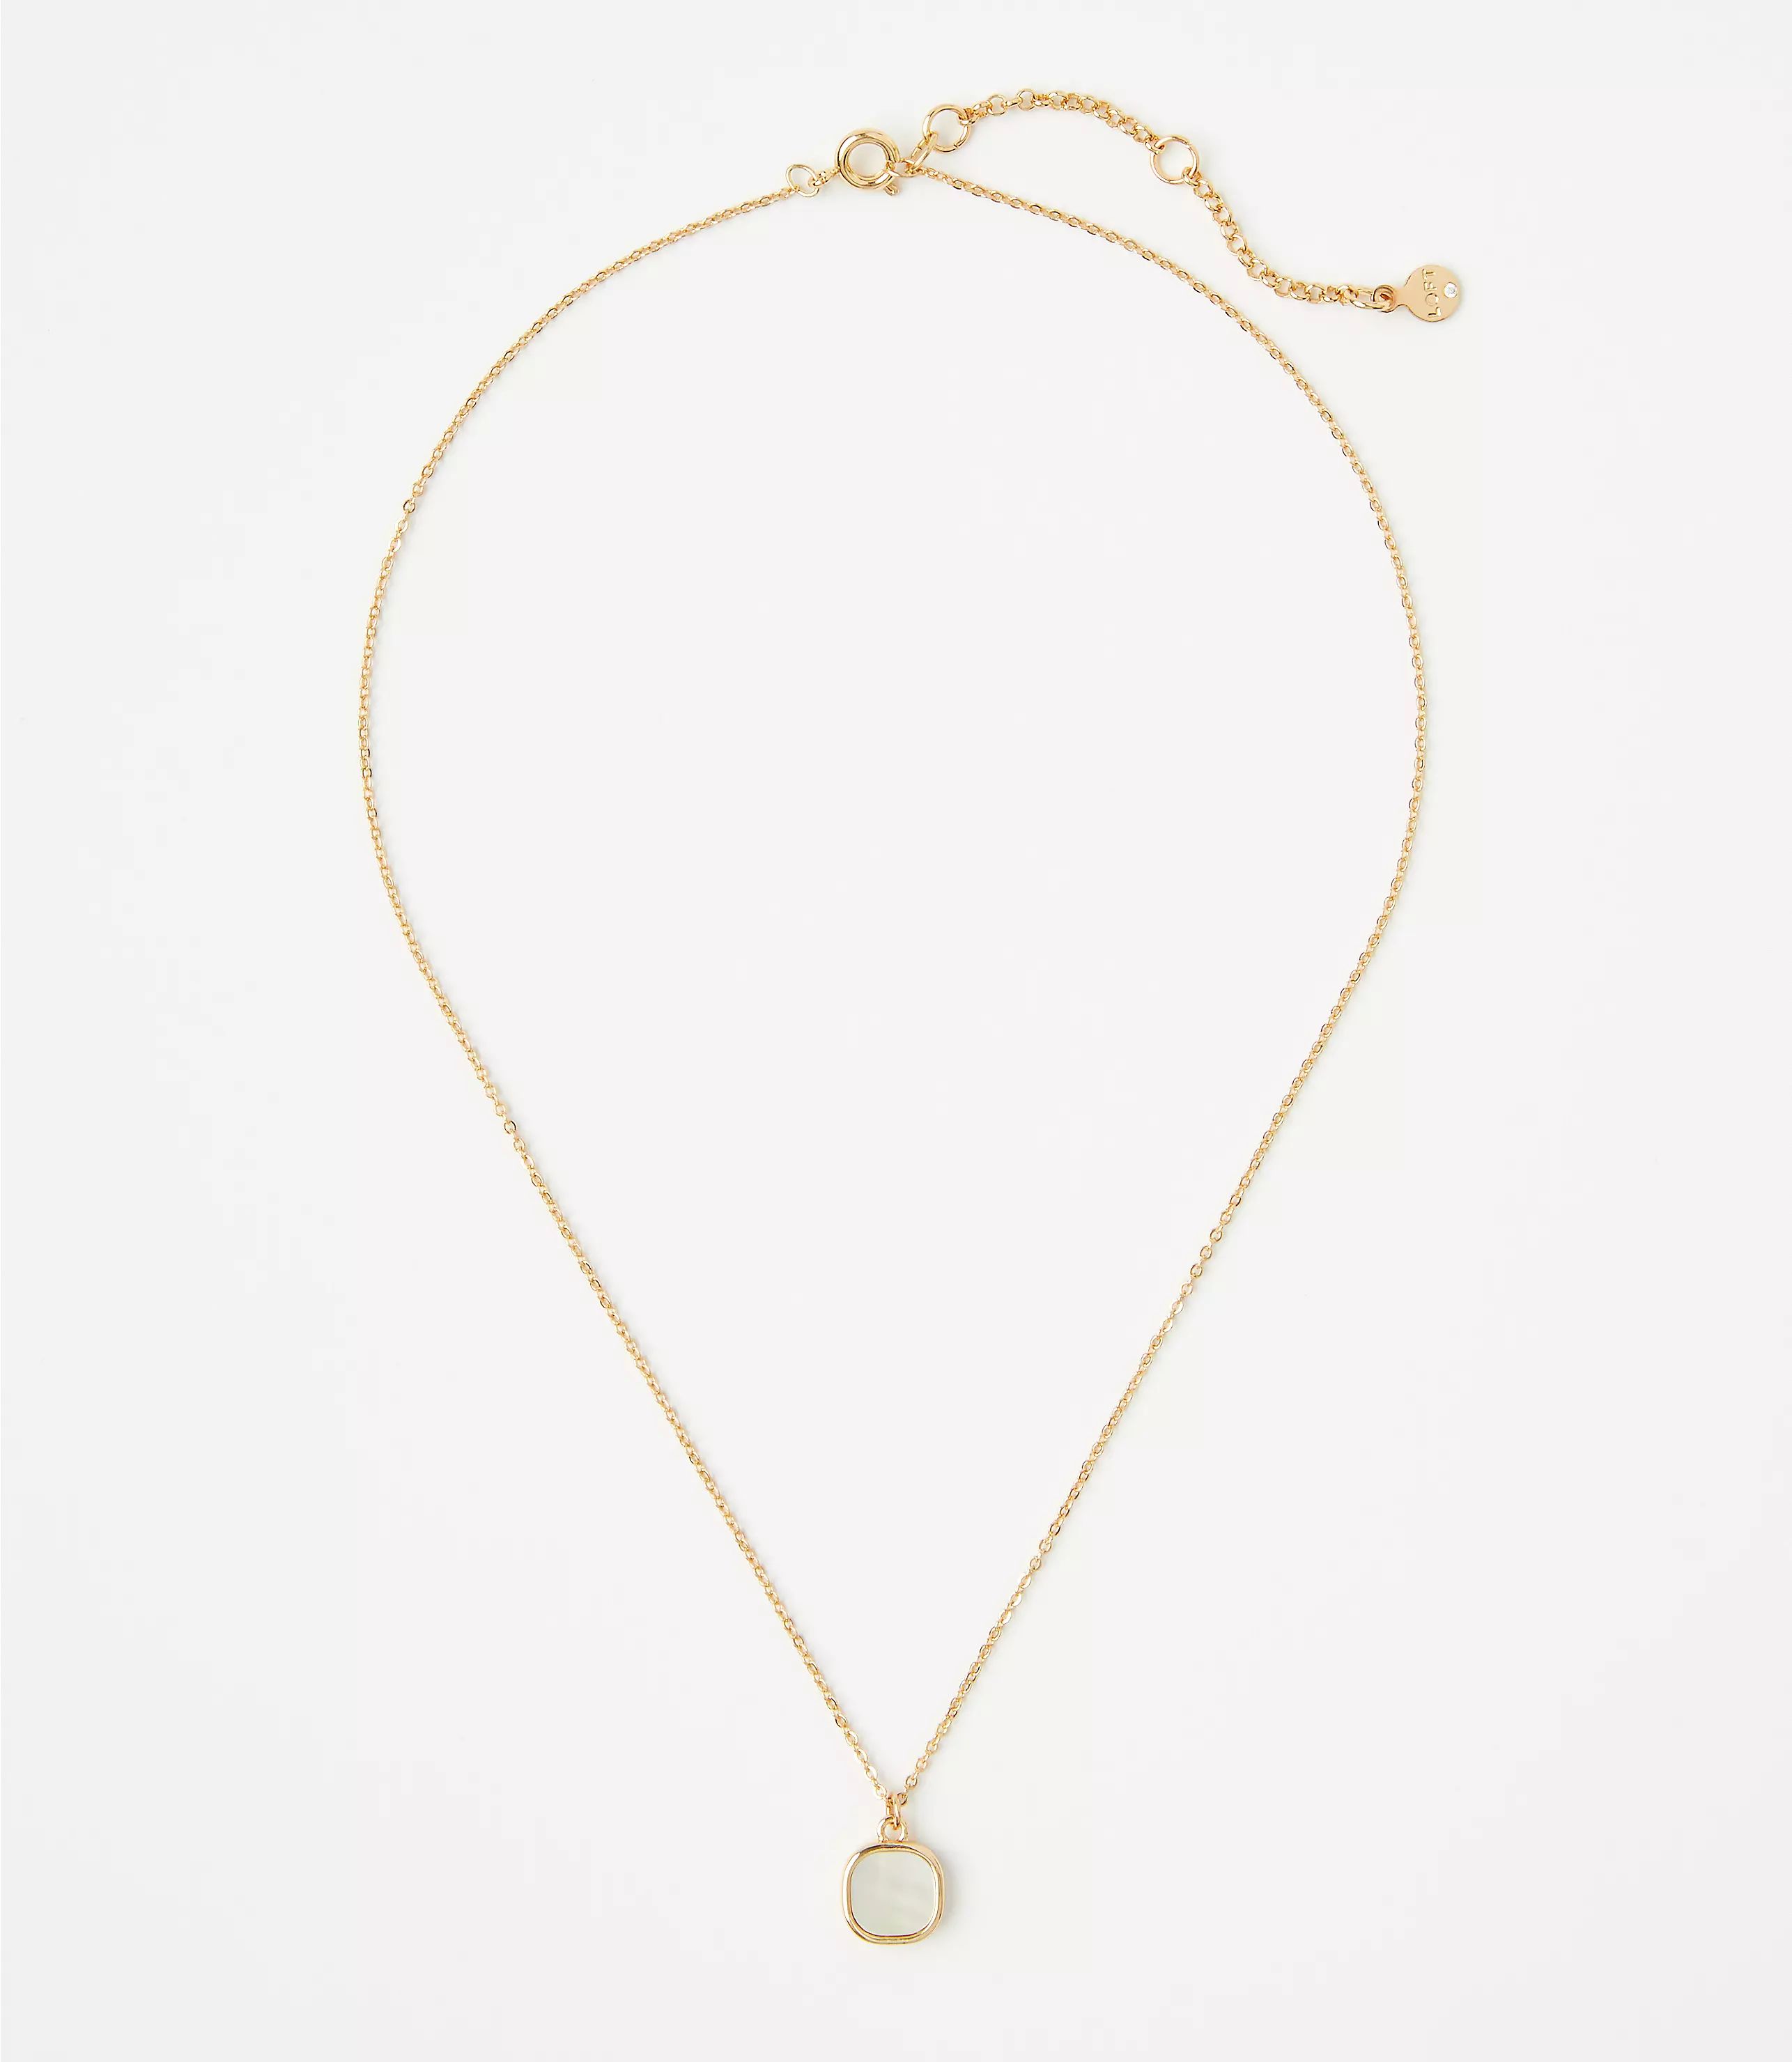 Rounded Square Necklace | LOFT